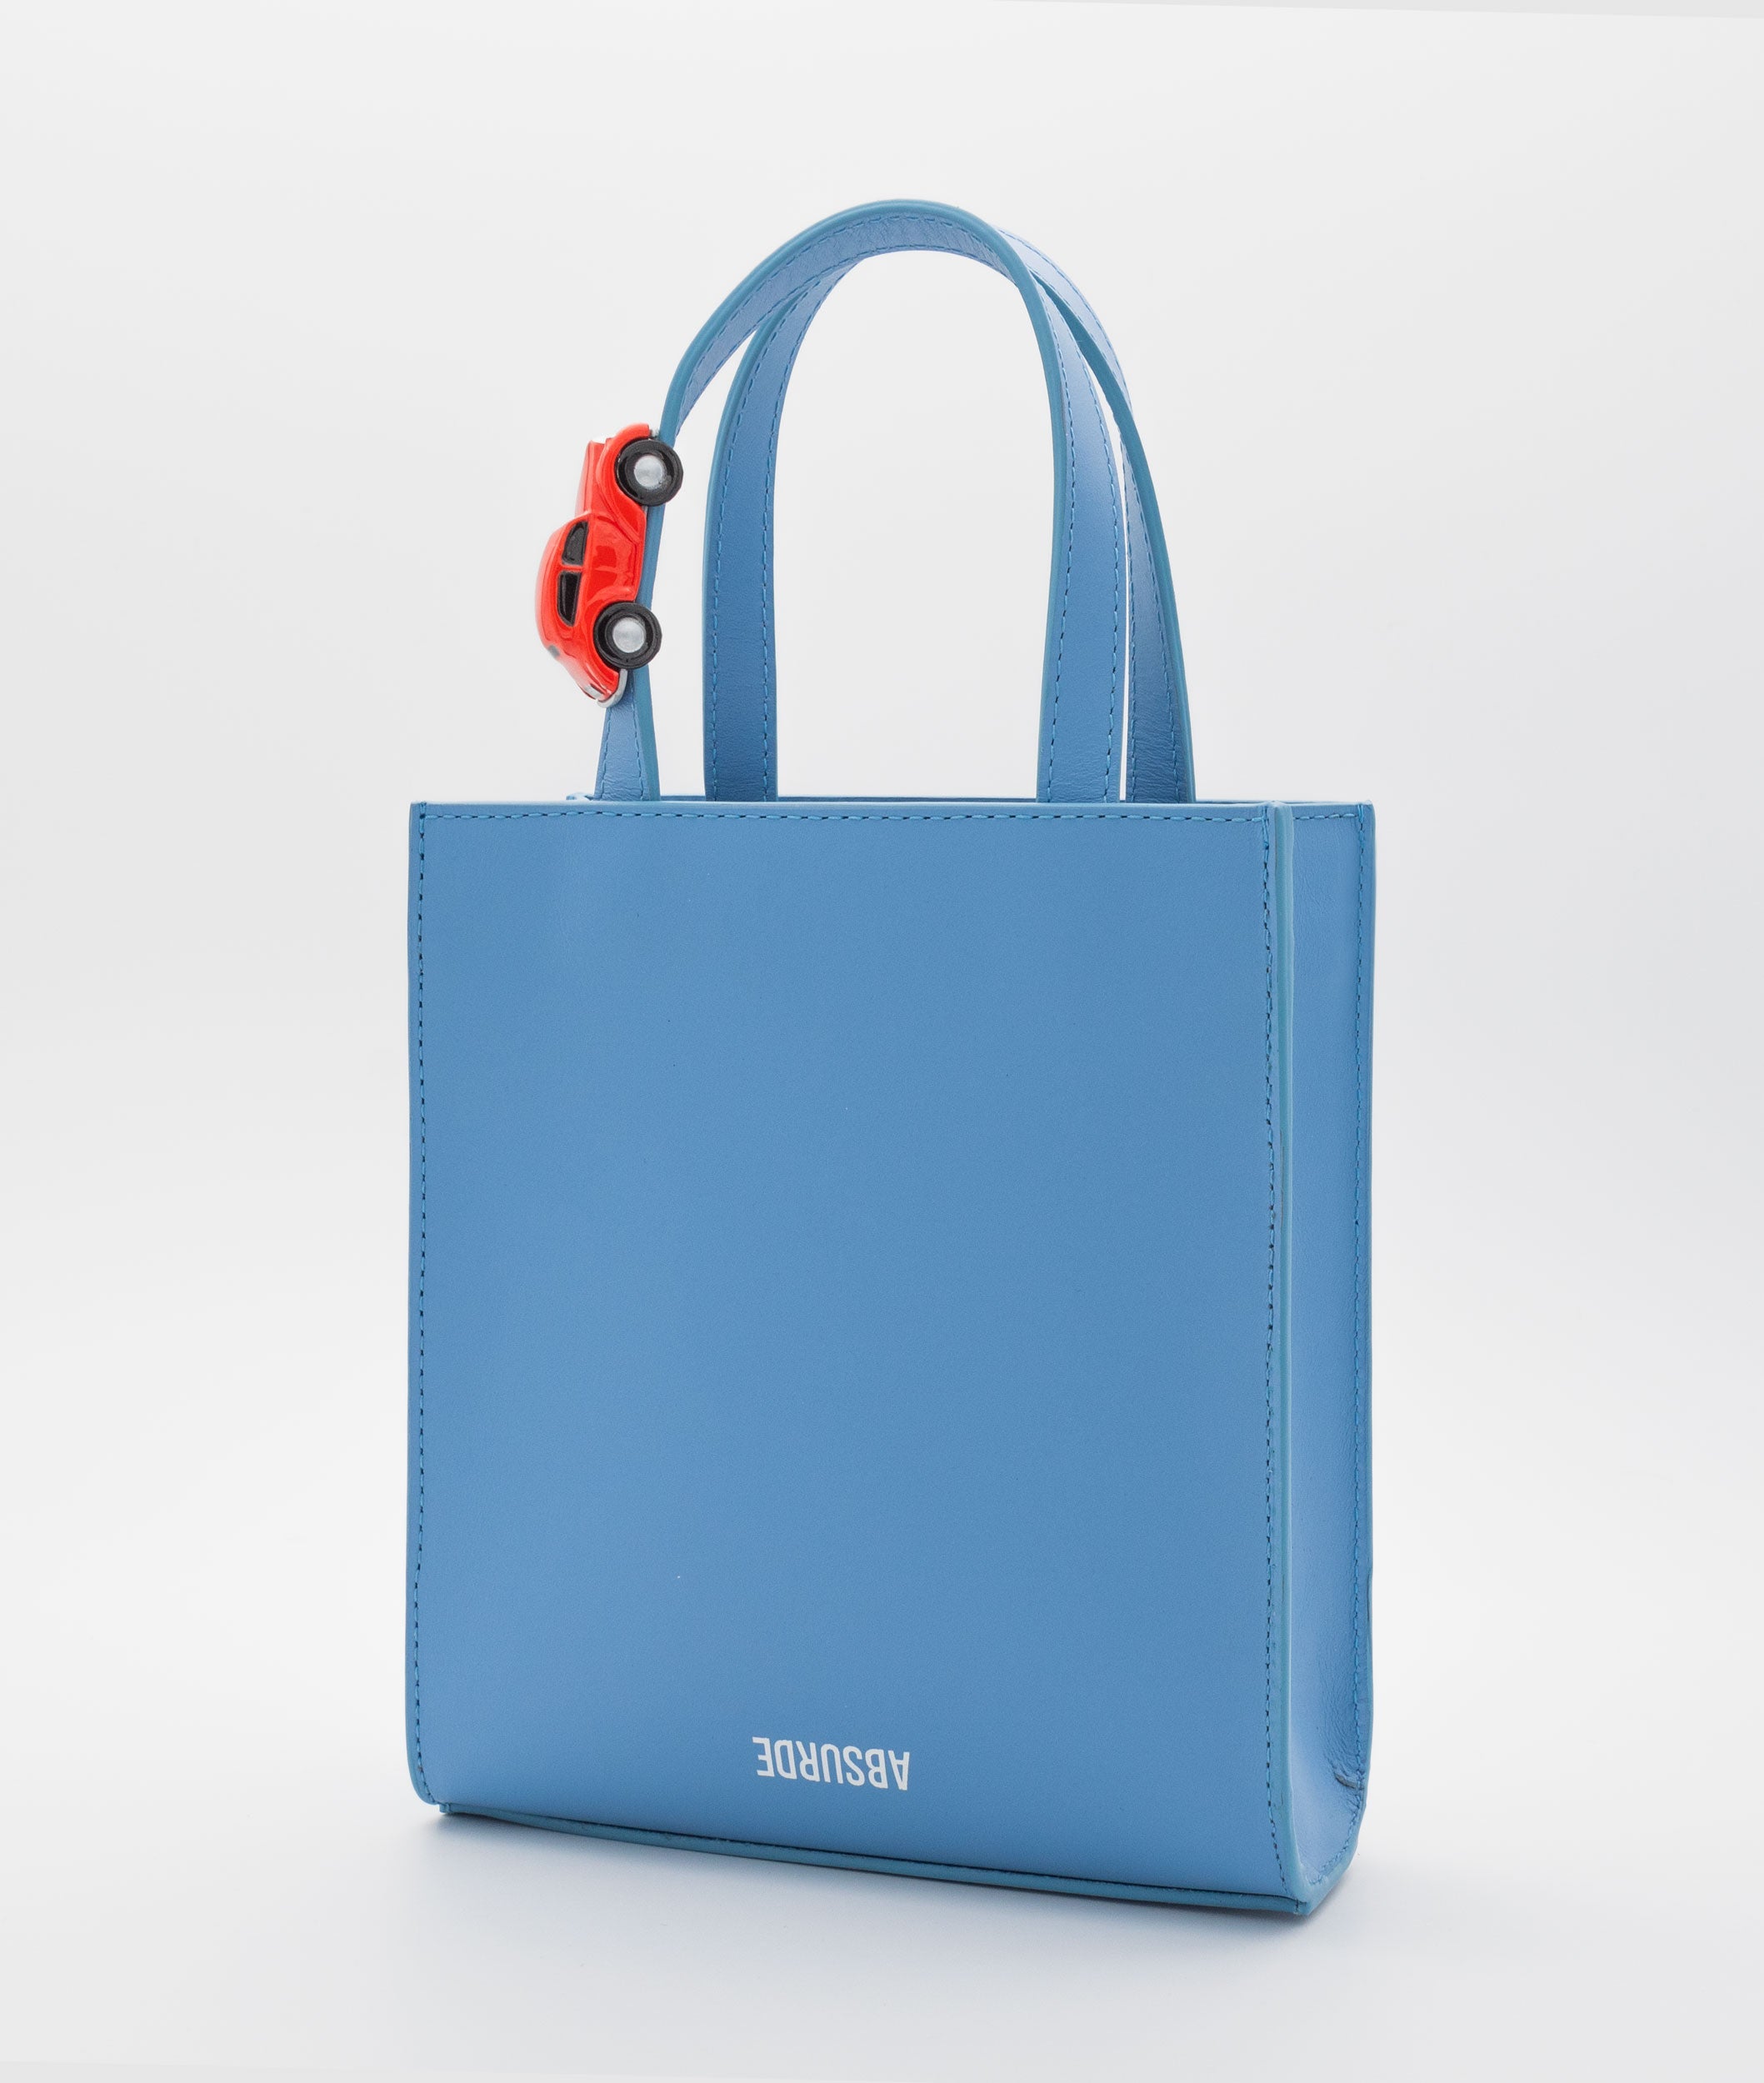 STOP Mini Tote Bag in Blue Leather